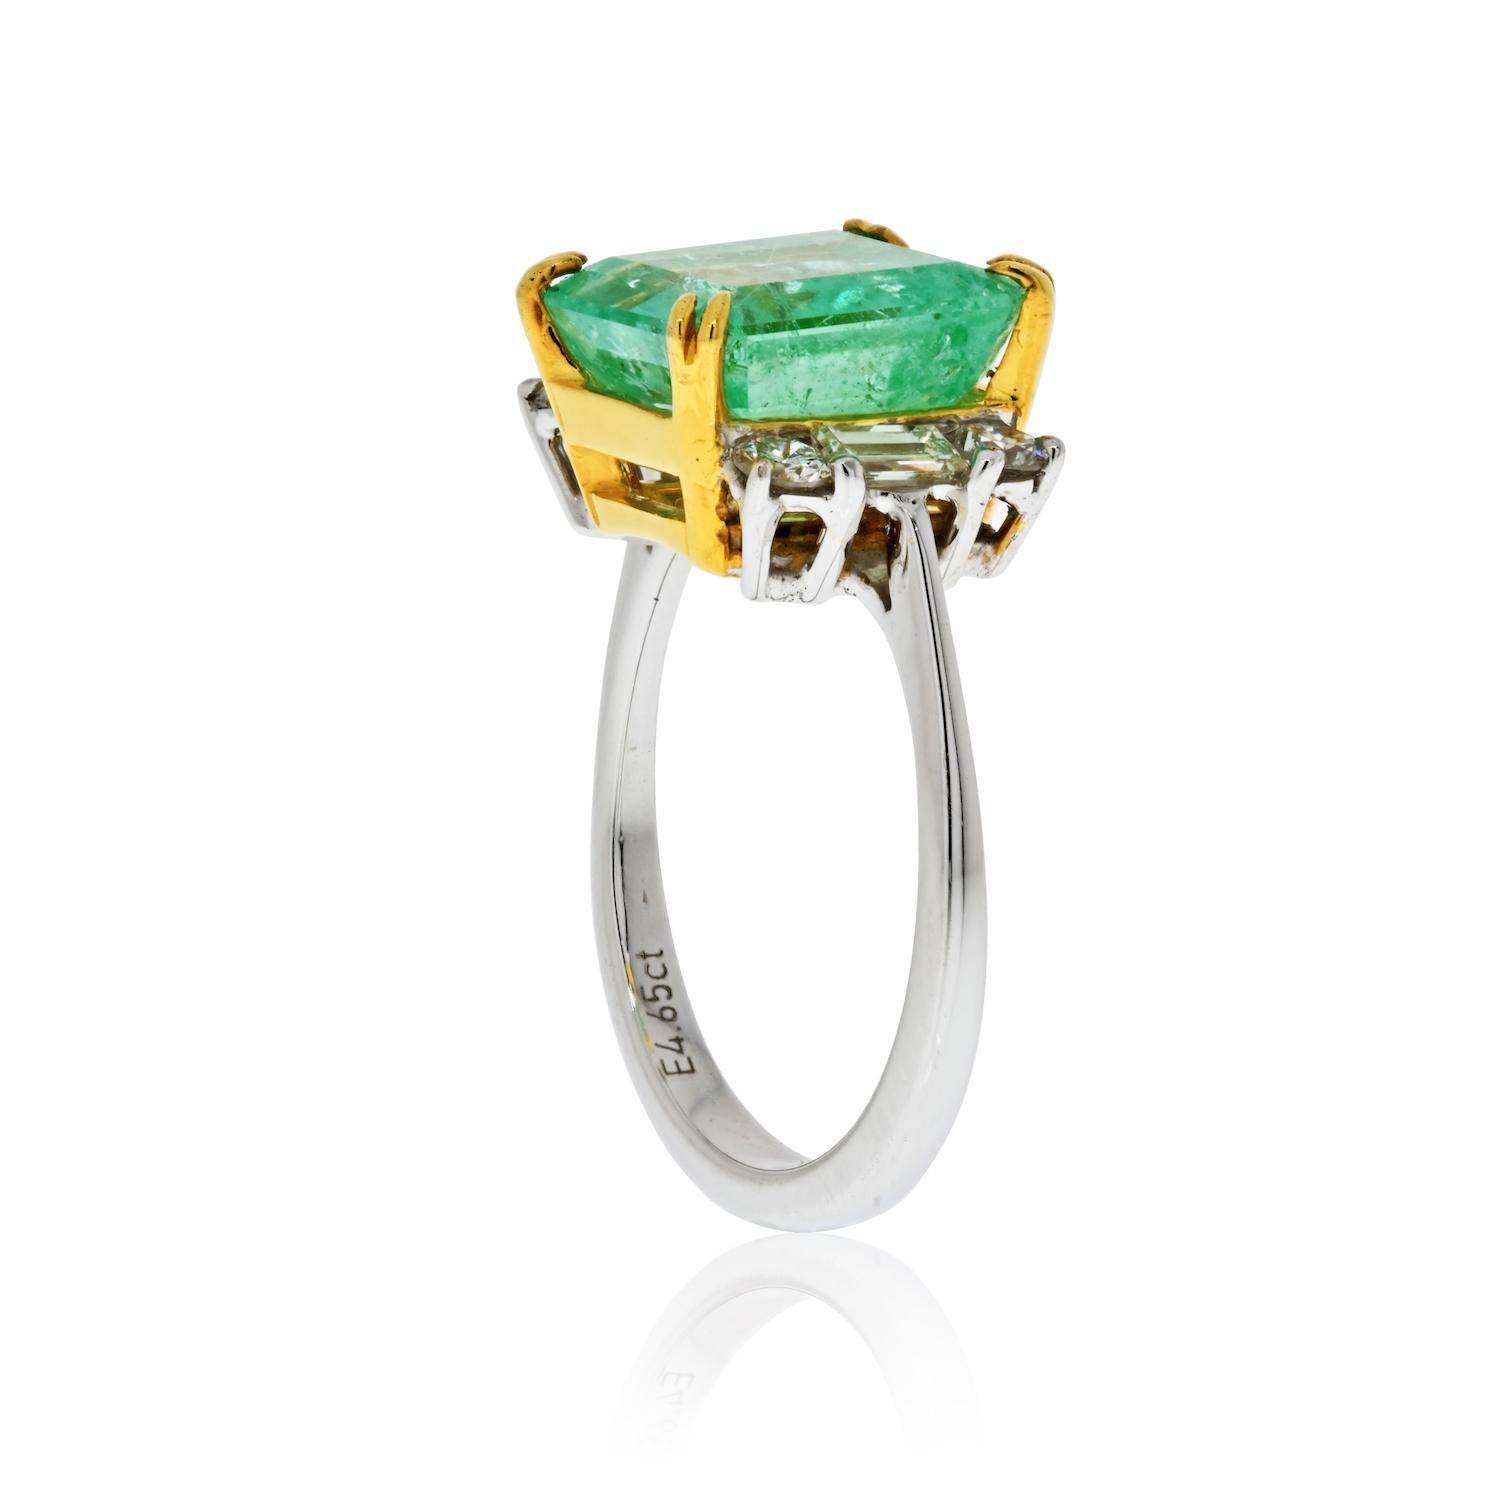 Centering a 4.65 Carat Emerald-Cut Colombian Emerald, accented by 0.66 carats of Round-Brilliant Cut and Baguette Tapered Cut White Diamonds, and set in 18K White Gold, this cocktail ring is a Gad & Co favorite!

Details
✔Gemstone: Emerald
✔Gem